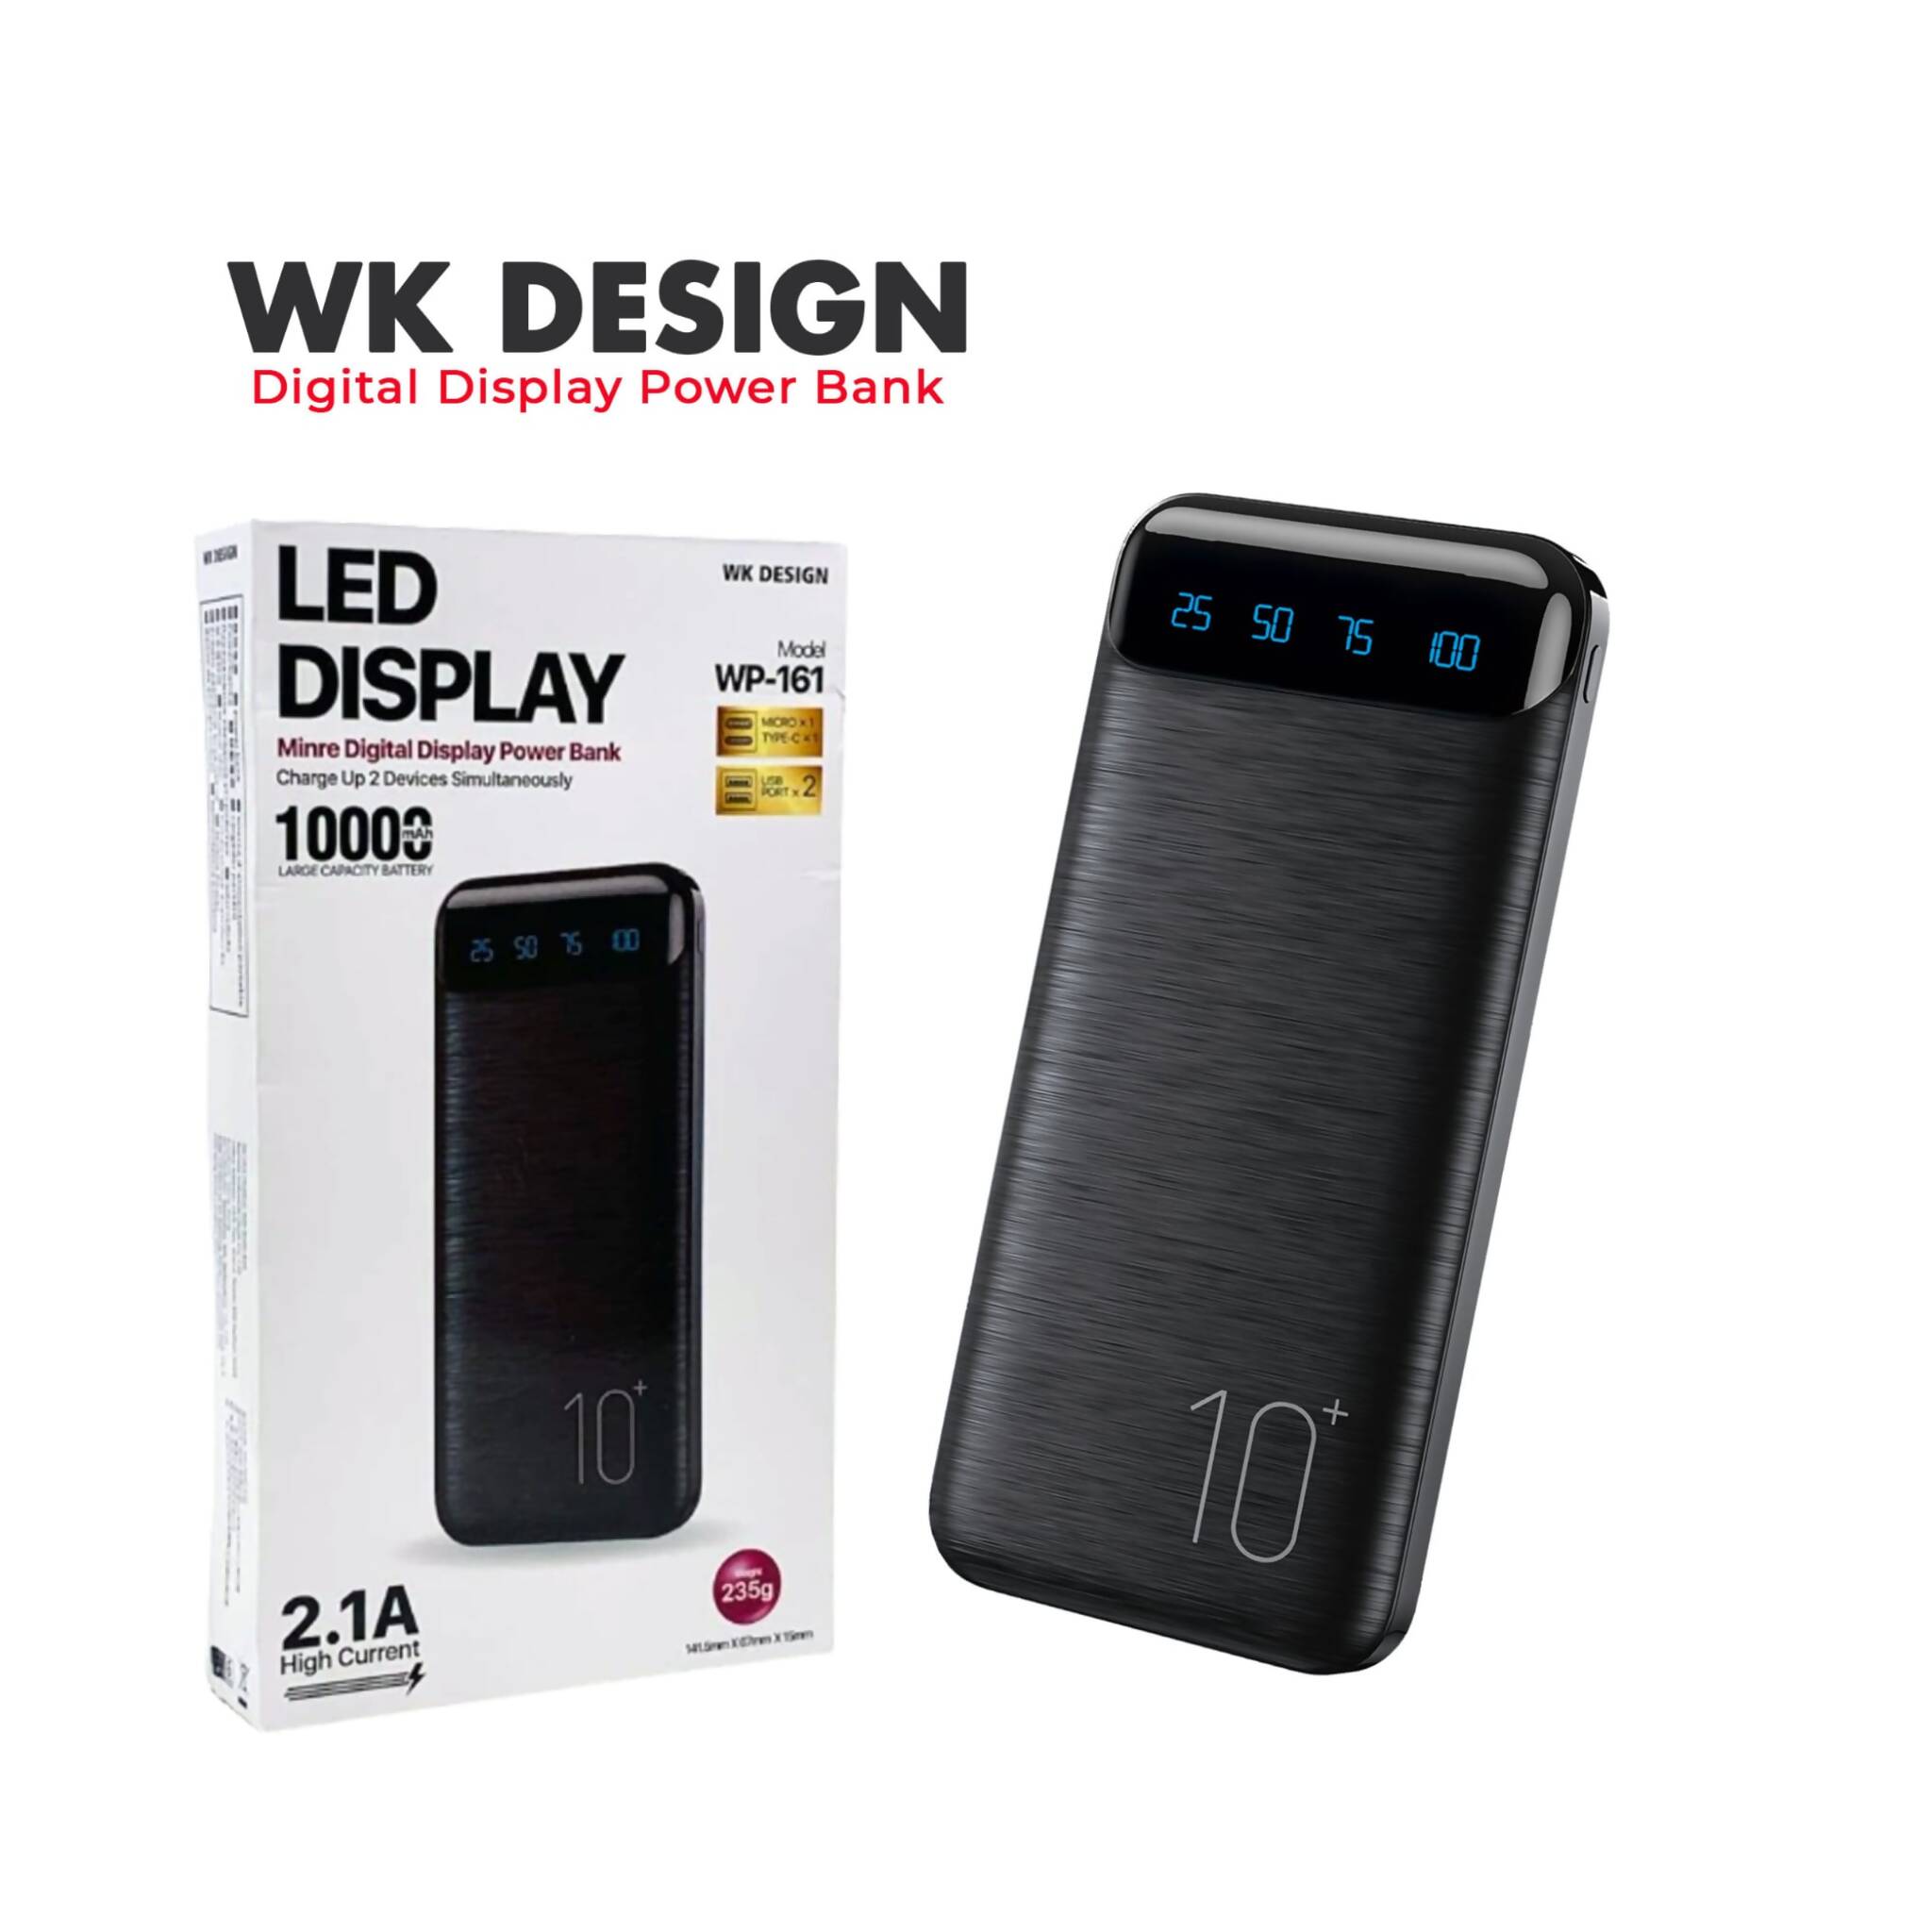 Power Bank, Efficient Dual USB Charging, Fast Charge Support & Digital Display